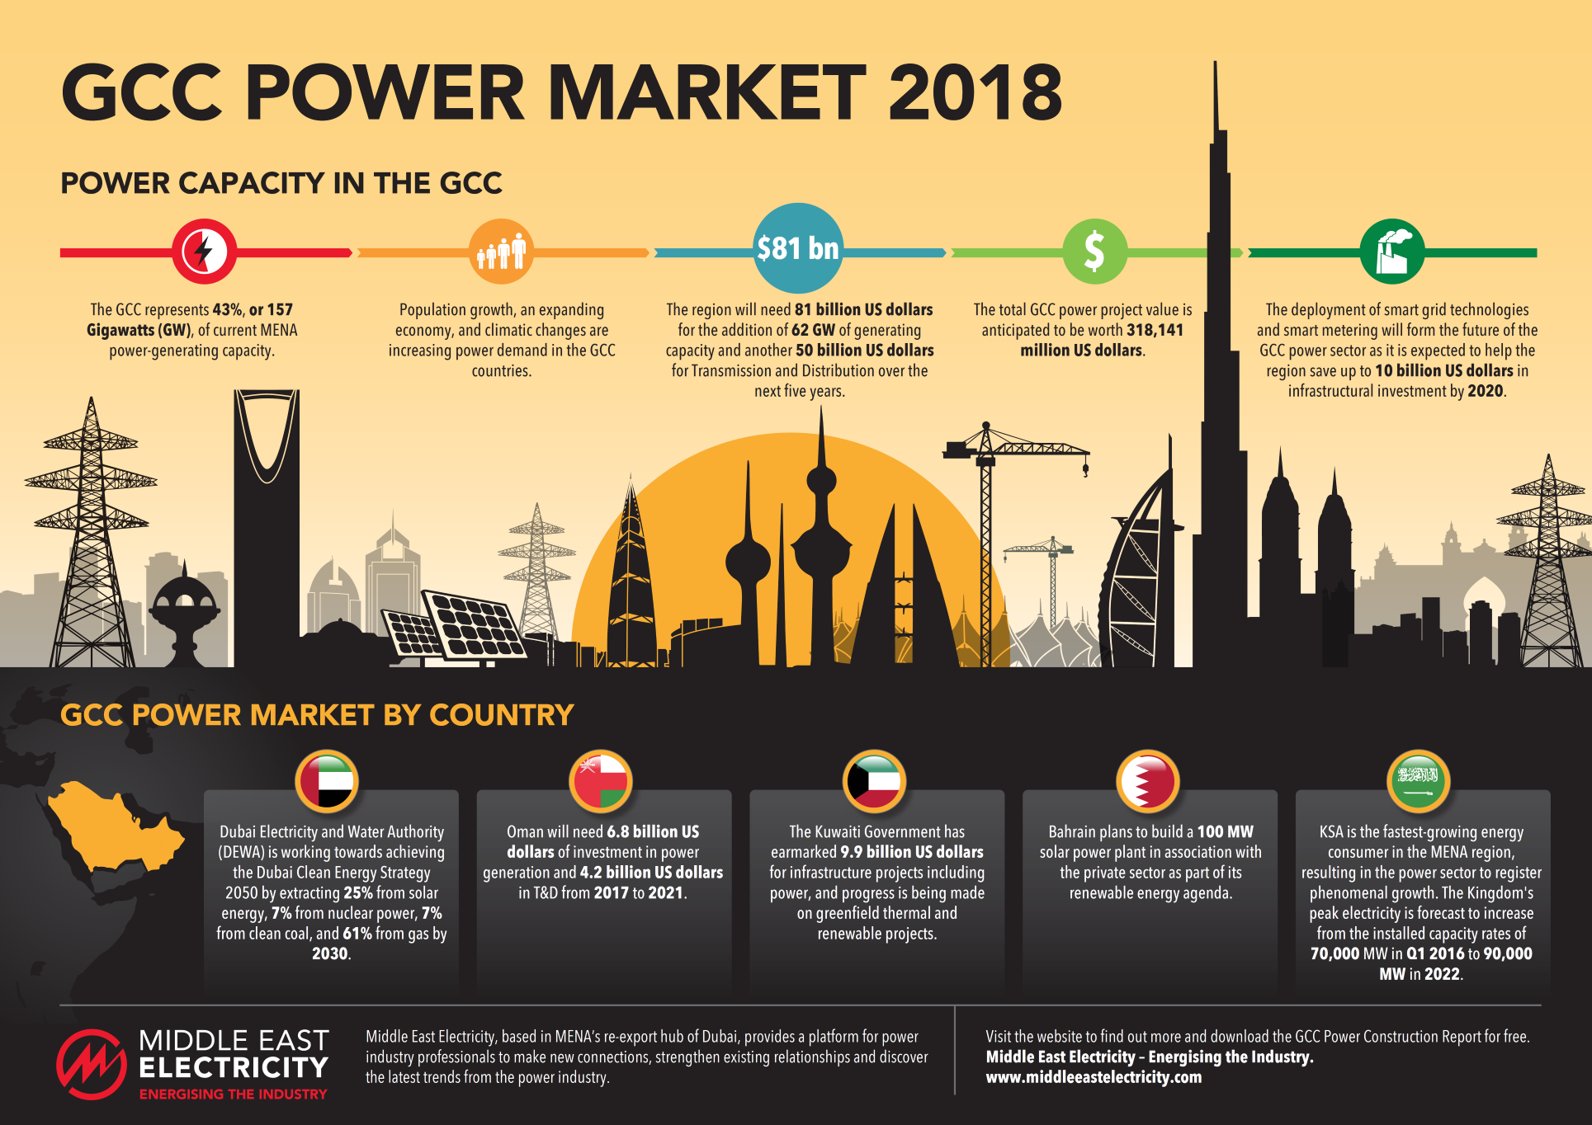 Narabar bus Anvendelse Middle East Energy on Twitter: "Do you have the 2018 copy of the #GCC #Power  Market Report? Learn what 2018 has in store for #energy trends and projects  in the #MiddleEast power